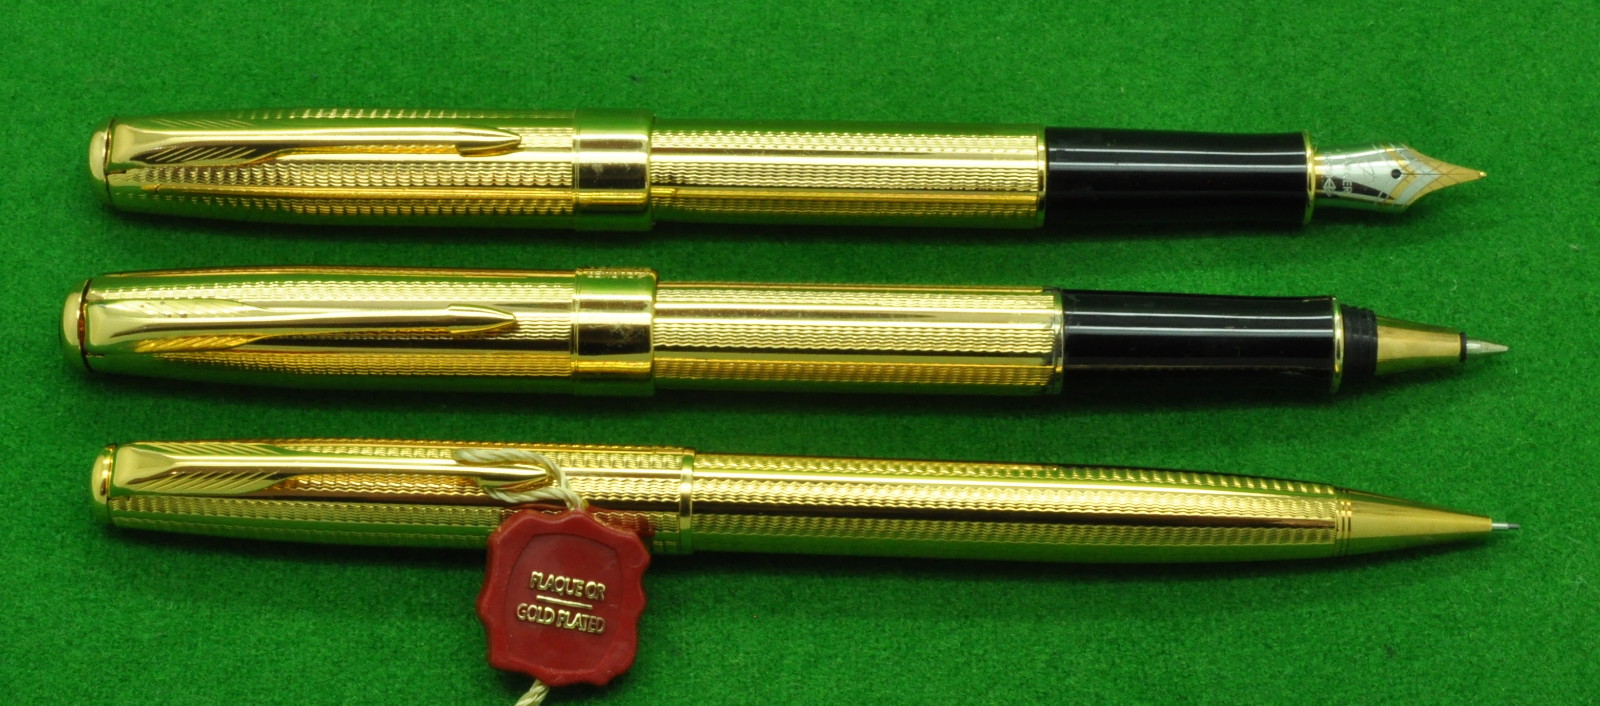 Parker Sonnet  HERITAGE COLLECTABLES – FULLY RESTORED VINTAGE WRITING  INSTRUMENTS